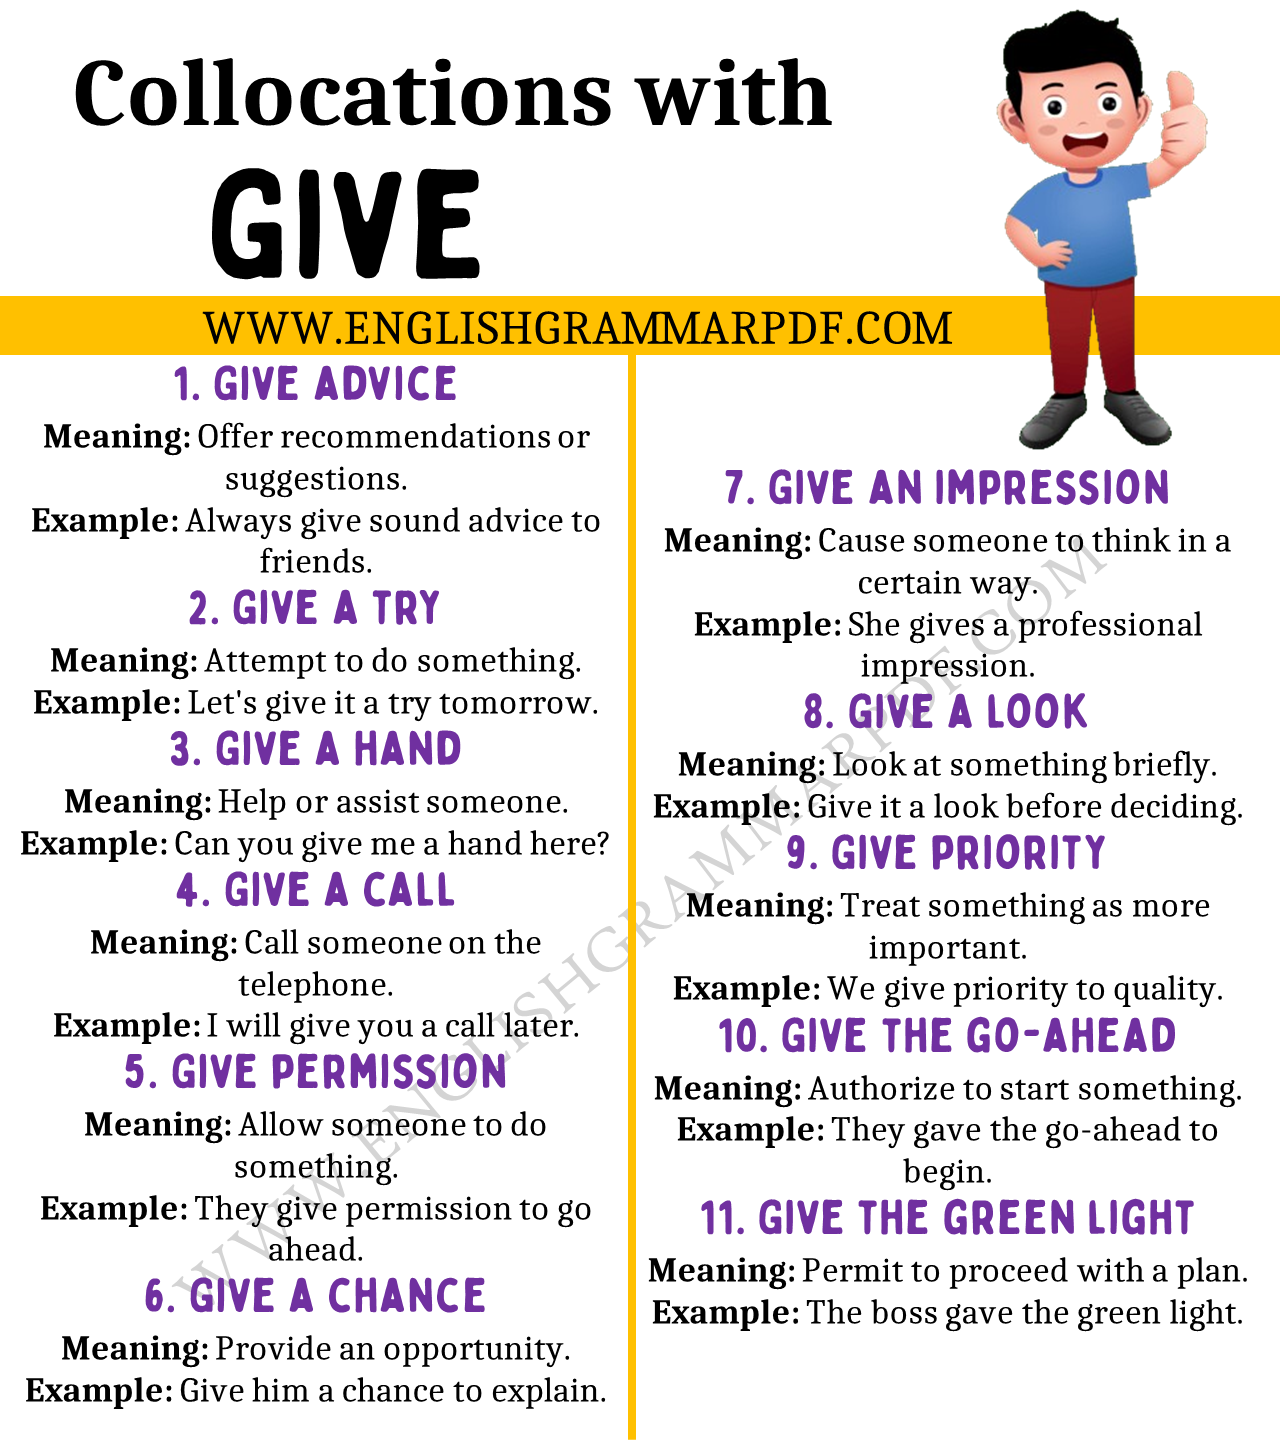 Collocations with “Give”